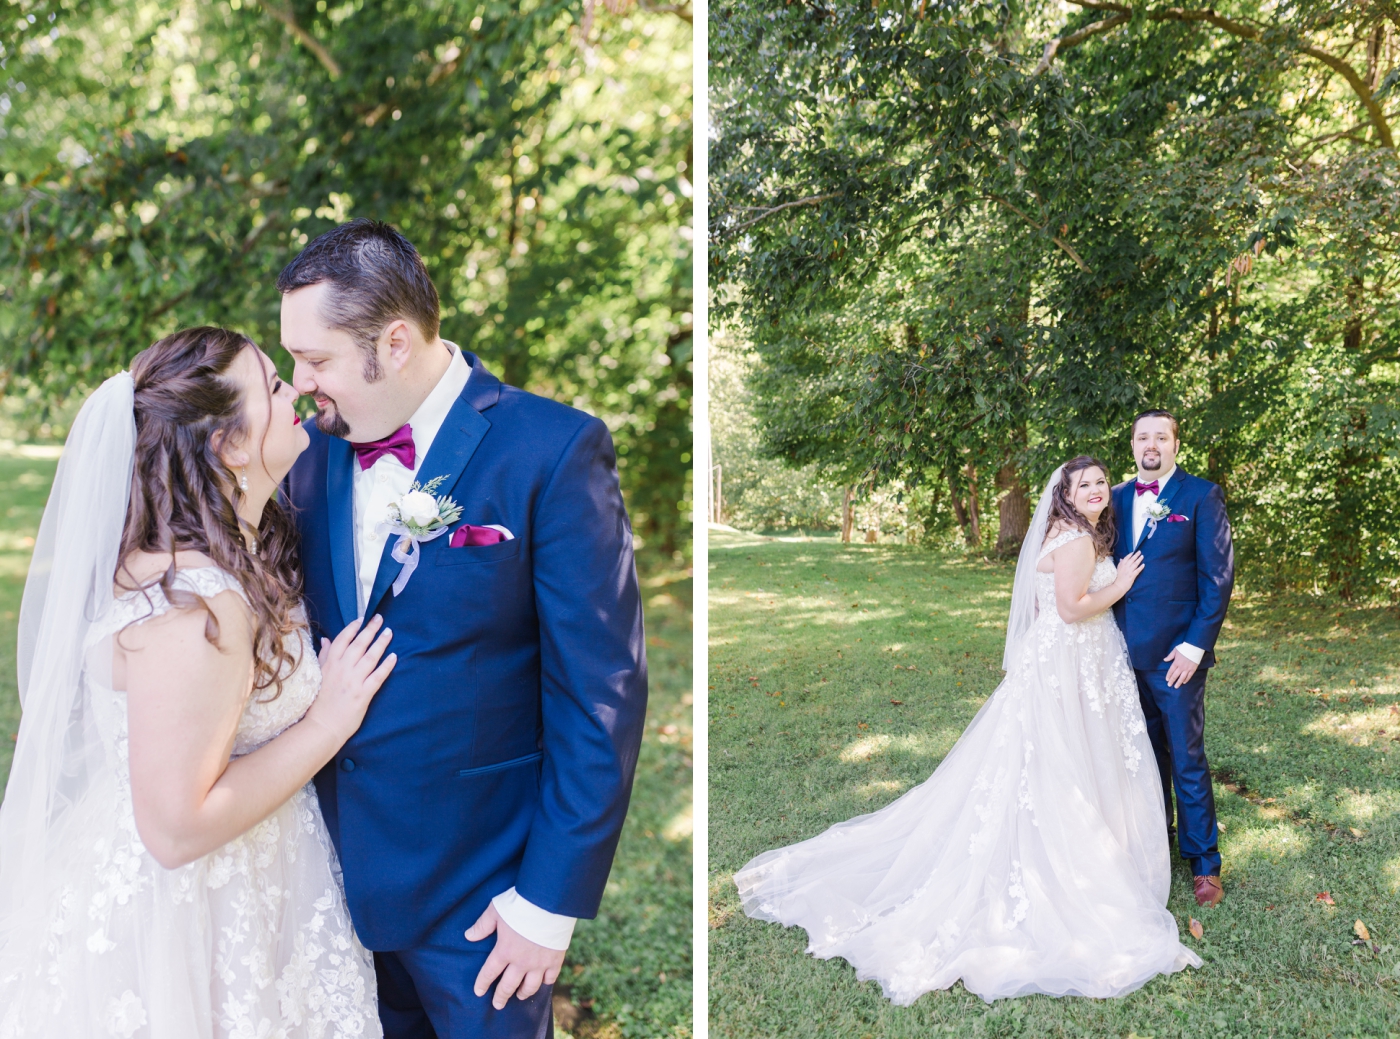 Burgundy and navy bridal party Bride and groom portraits in Fairmont, West Virginia